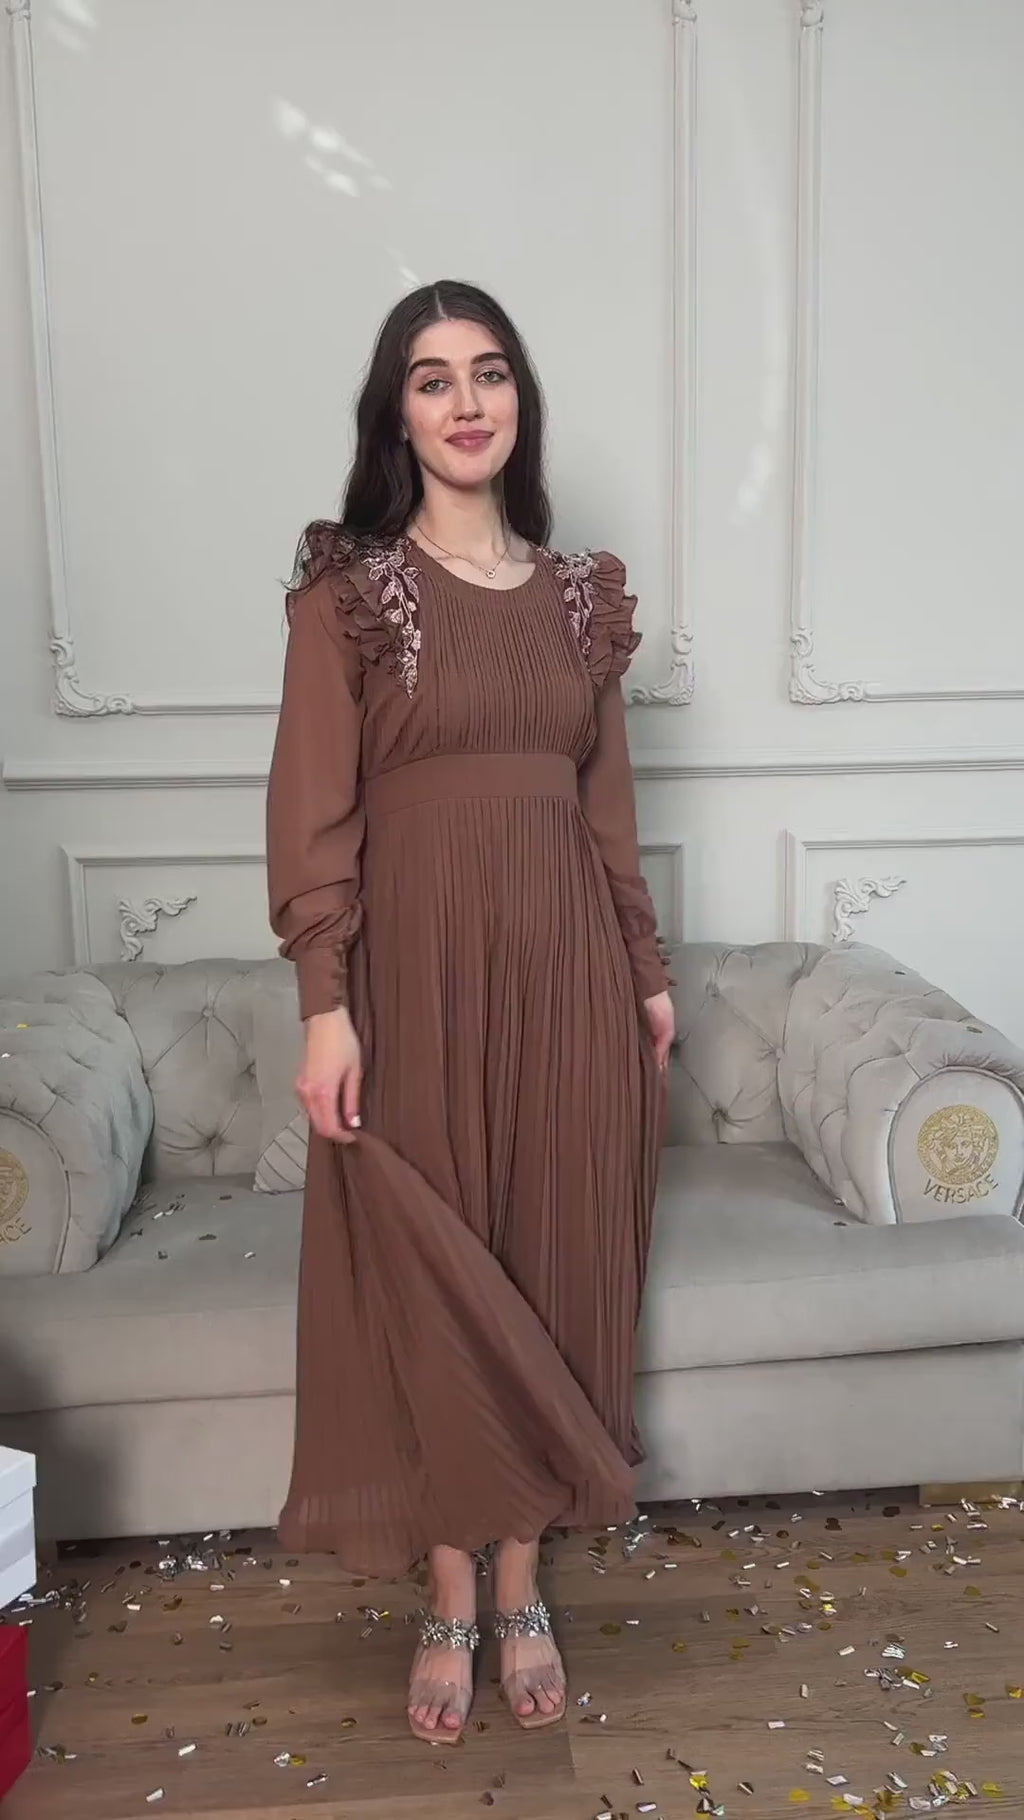 video of a model wearing brown pleated dress